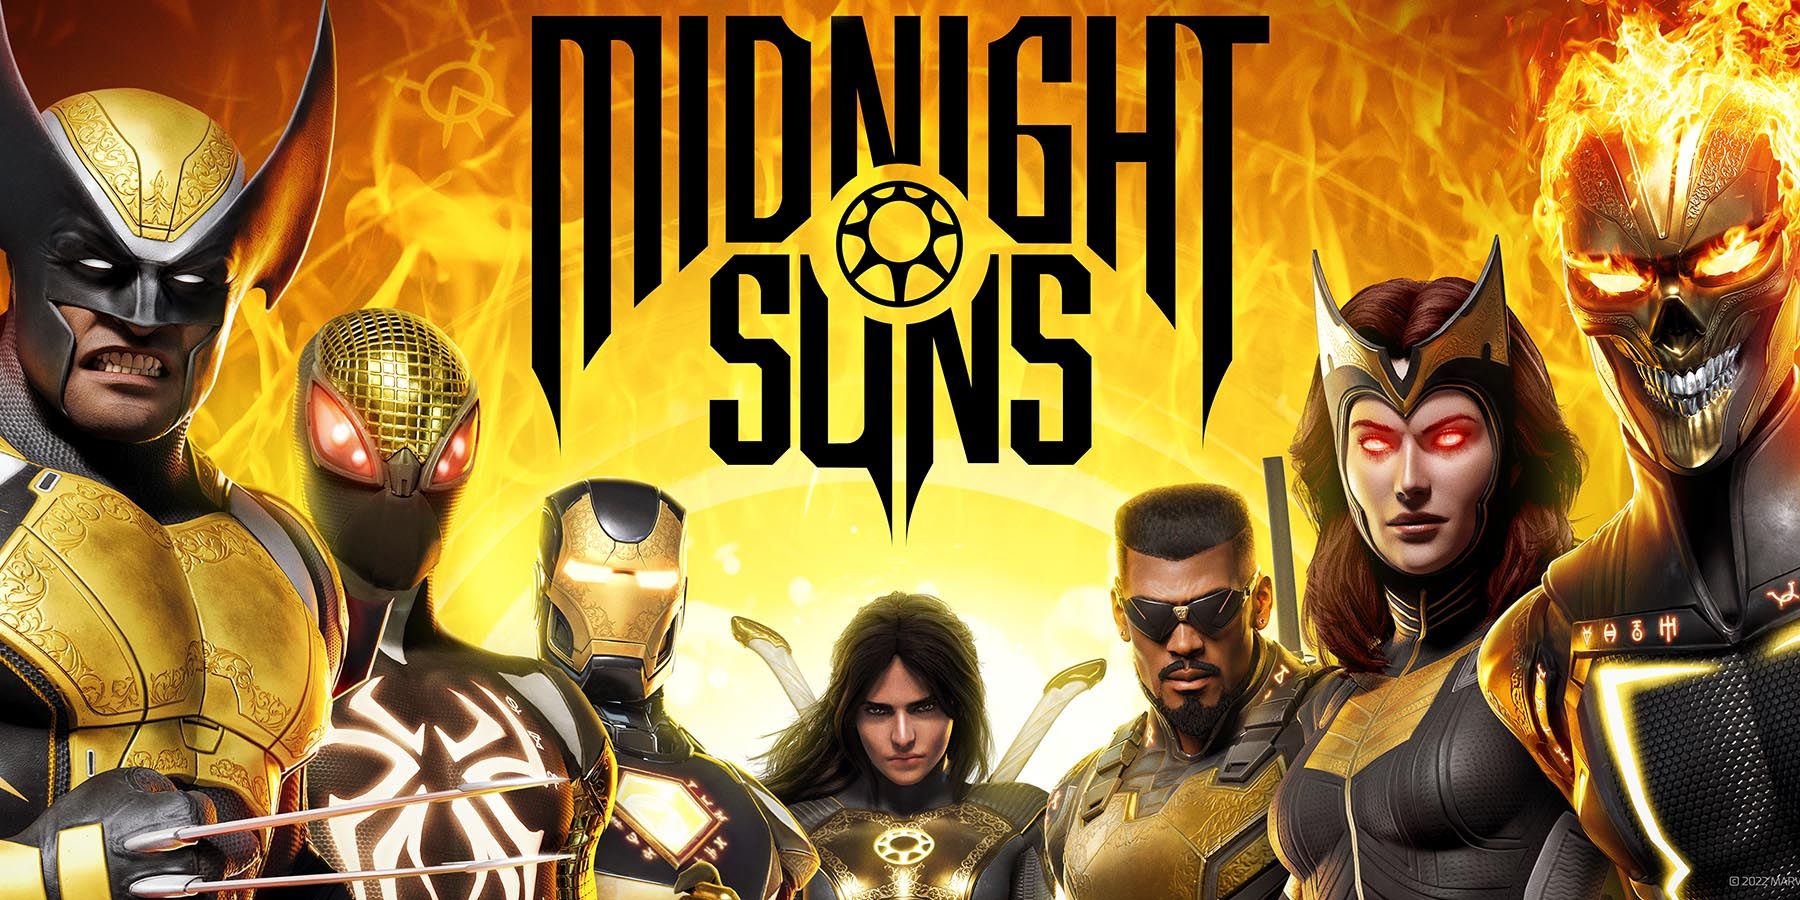 Characters Who Should Be Playable In Marvel's Midnight Suns